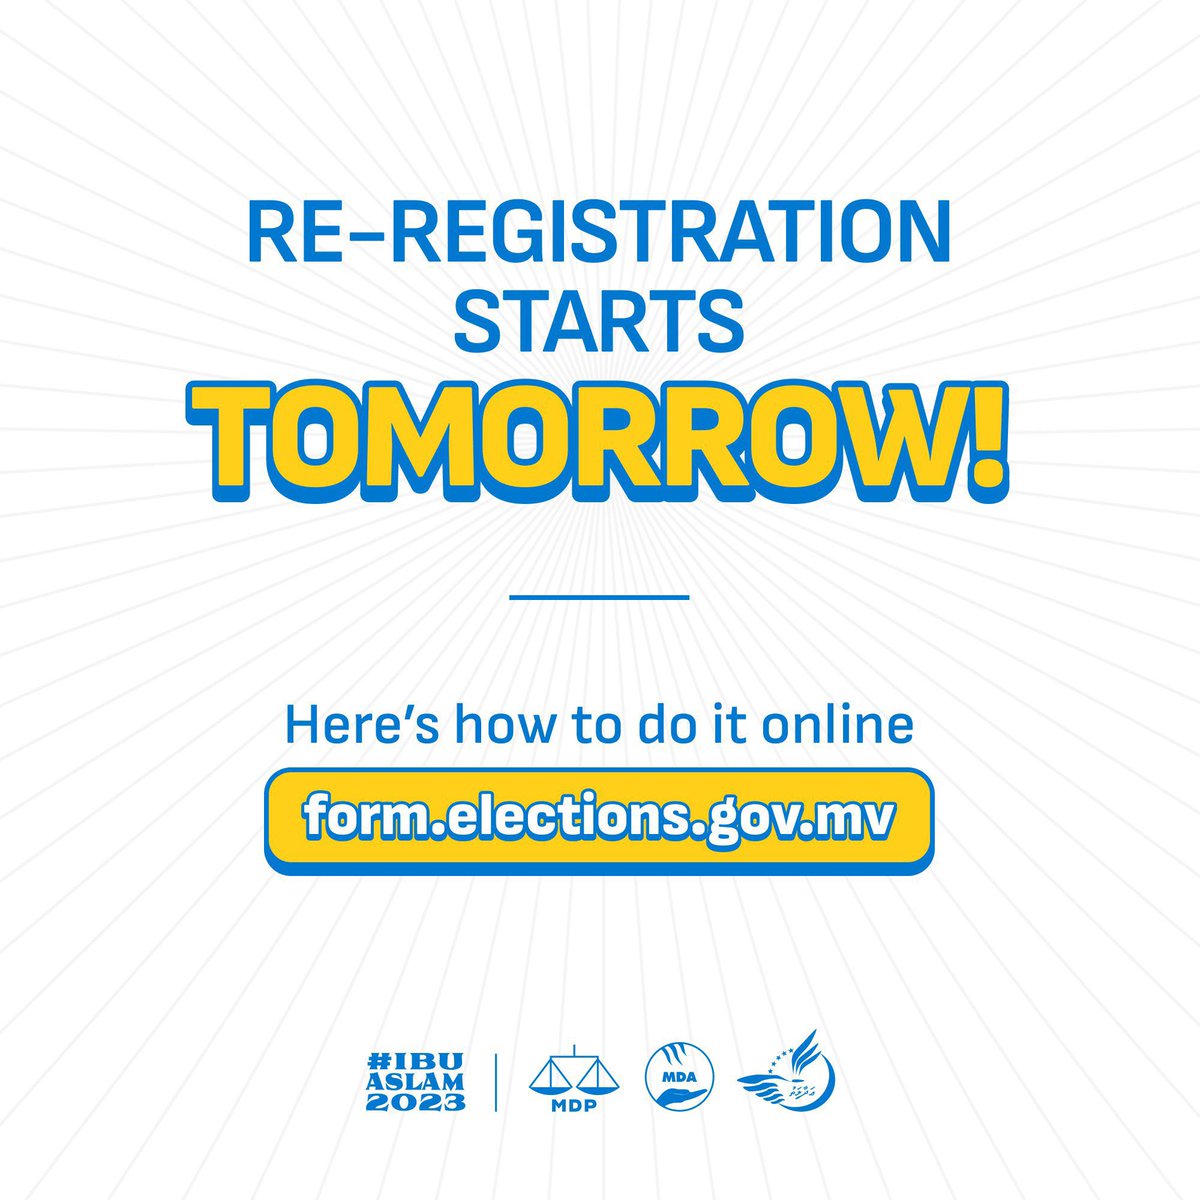 If you have not re-registered already please reach out and we will assist you.

Hotline +60116747370

#UfaaveriAmaanRaaje #VoteMDP #IBU2023 #IBUKL2023